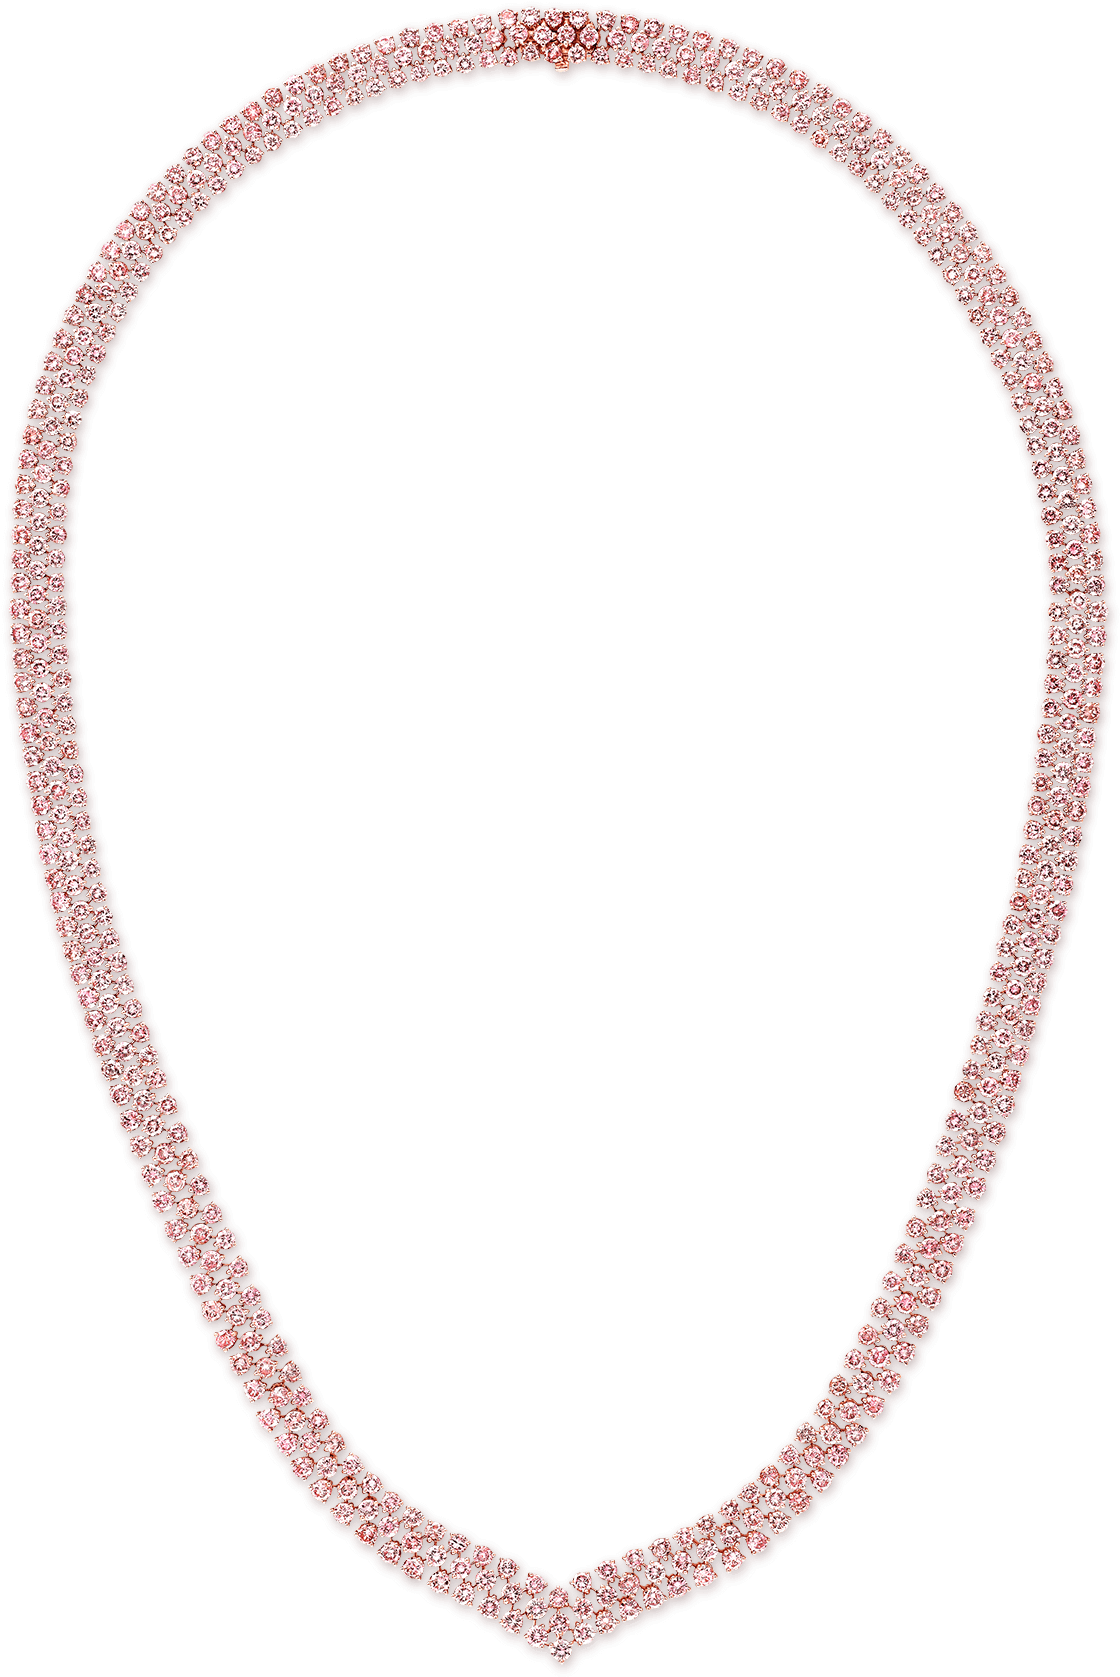 A Necklace Made Of Pink Stones